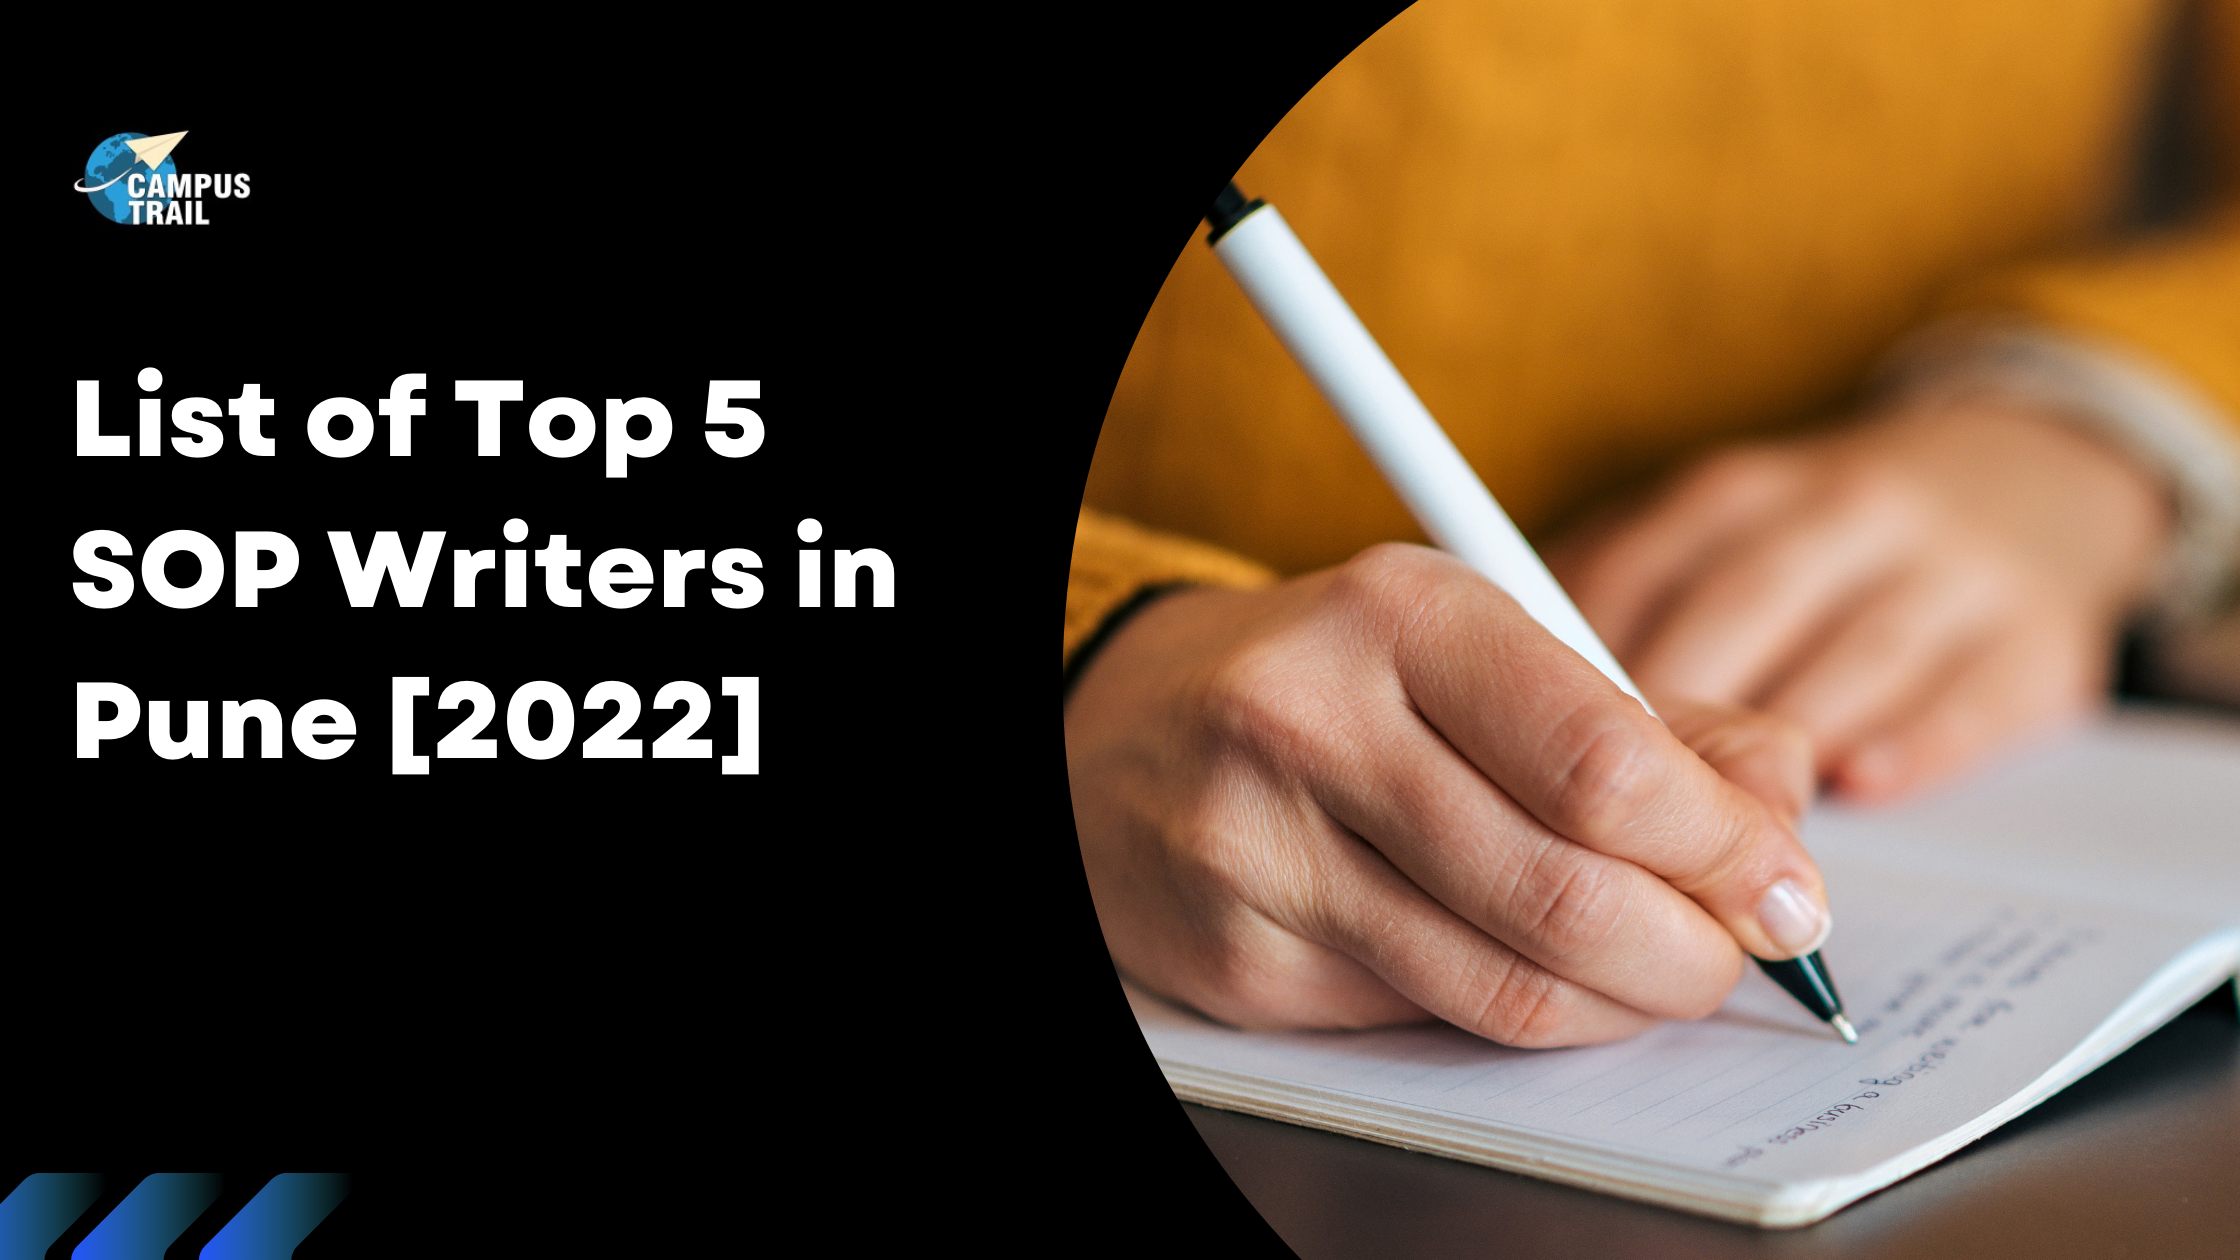 You are currently viewing List of Top 5 SOP Writers in Pune [2022]